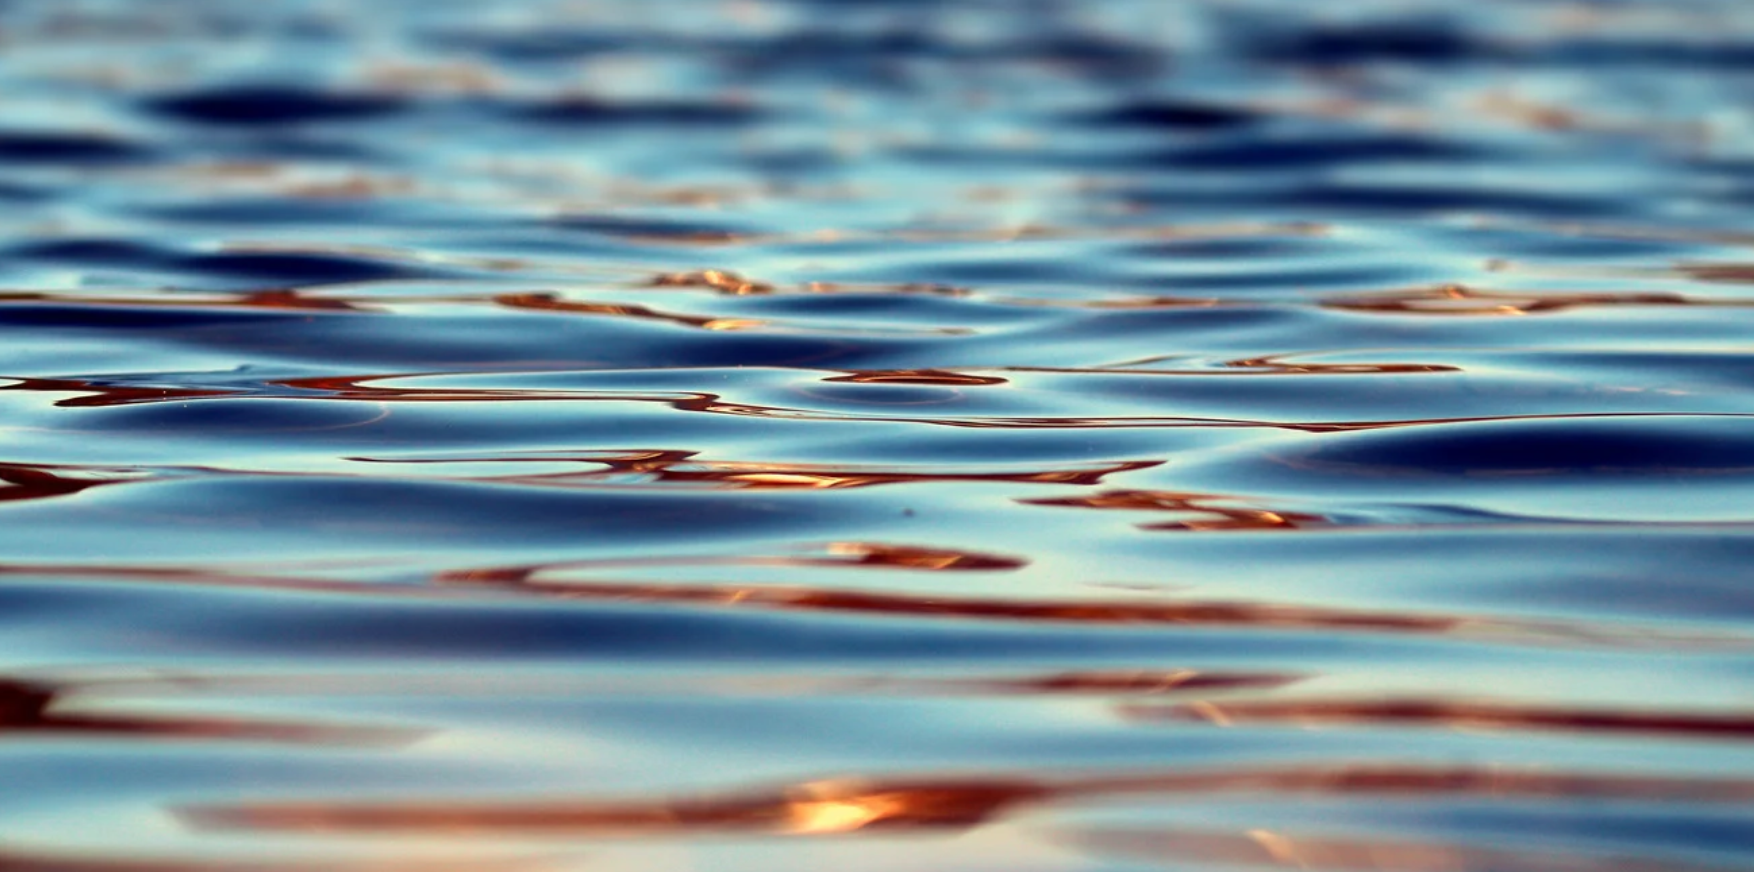 Sunlight reflecting on the surface of water